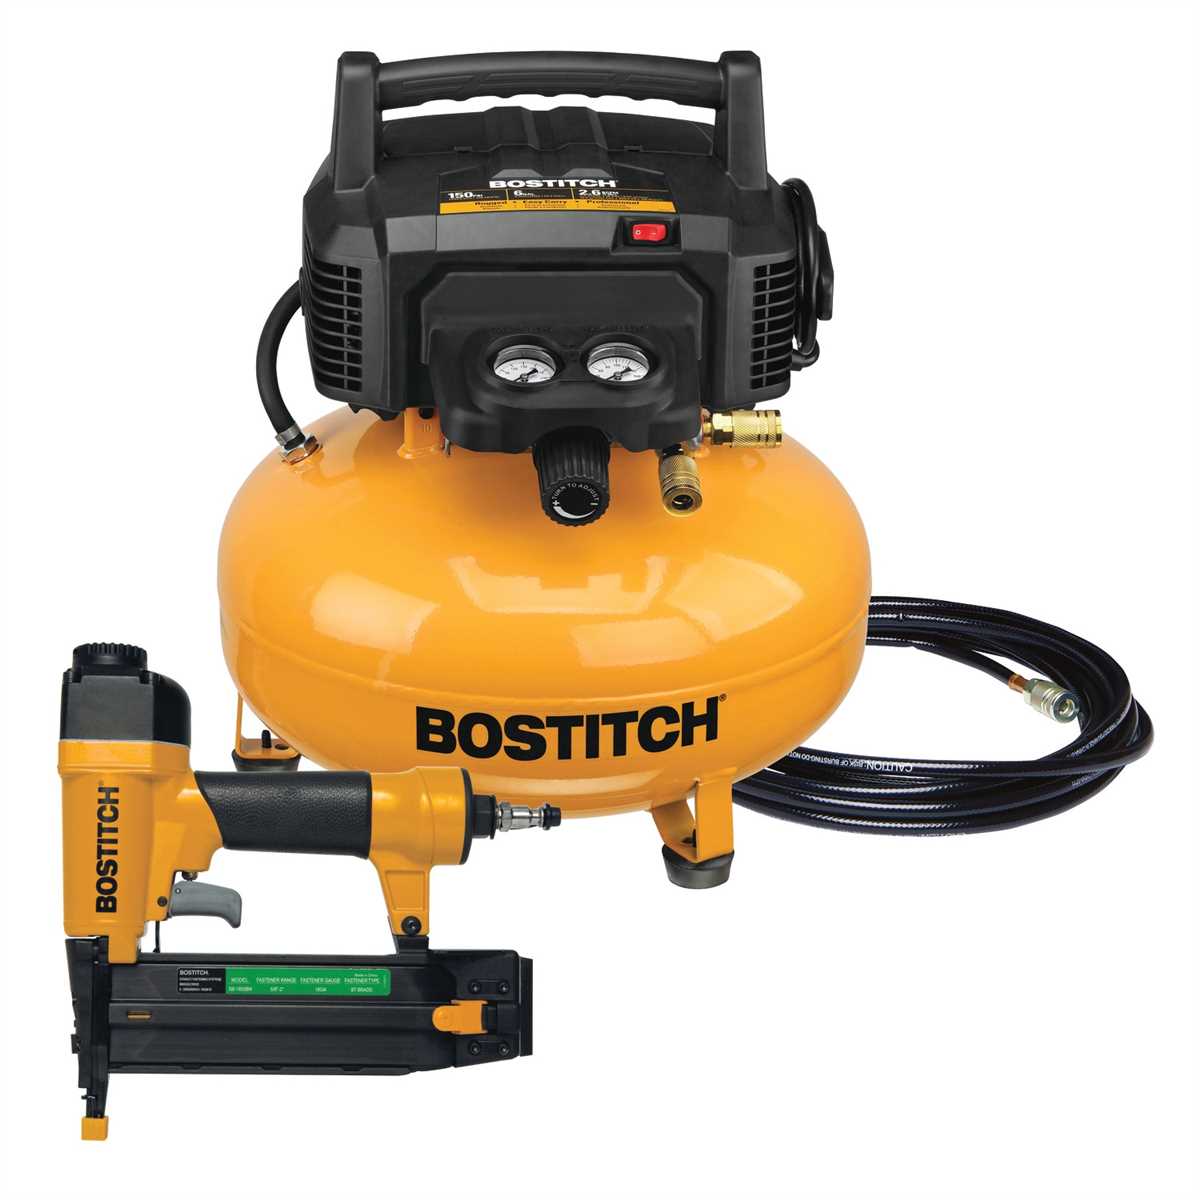 1.1 Identify the main parts of the Bostitch Air Compressor